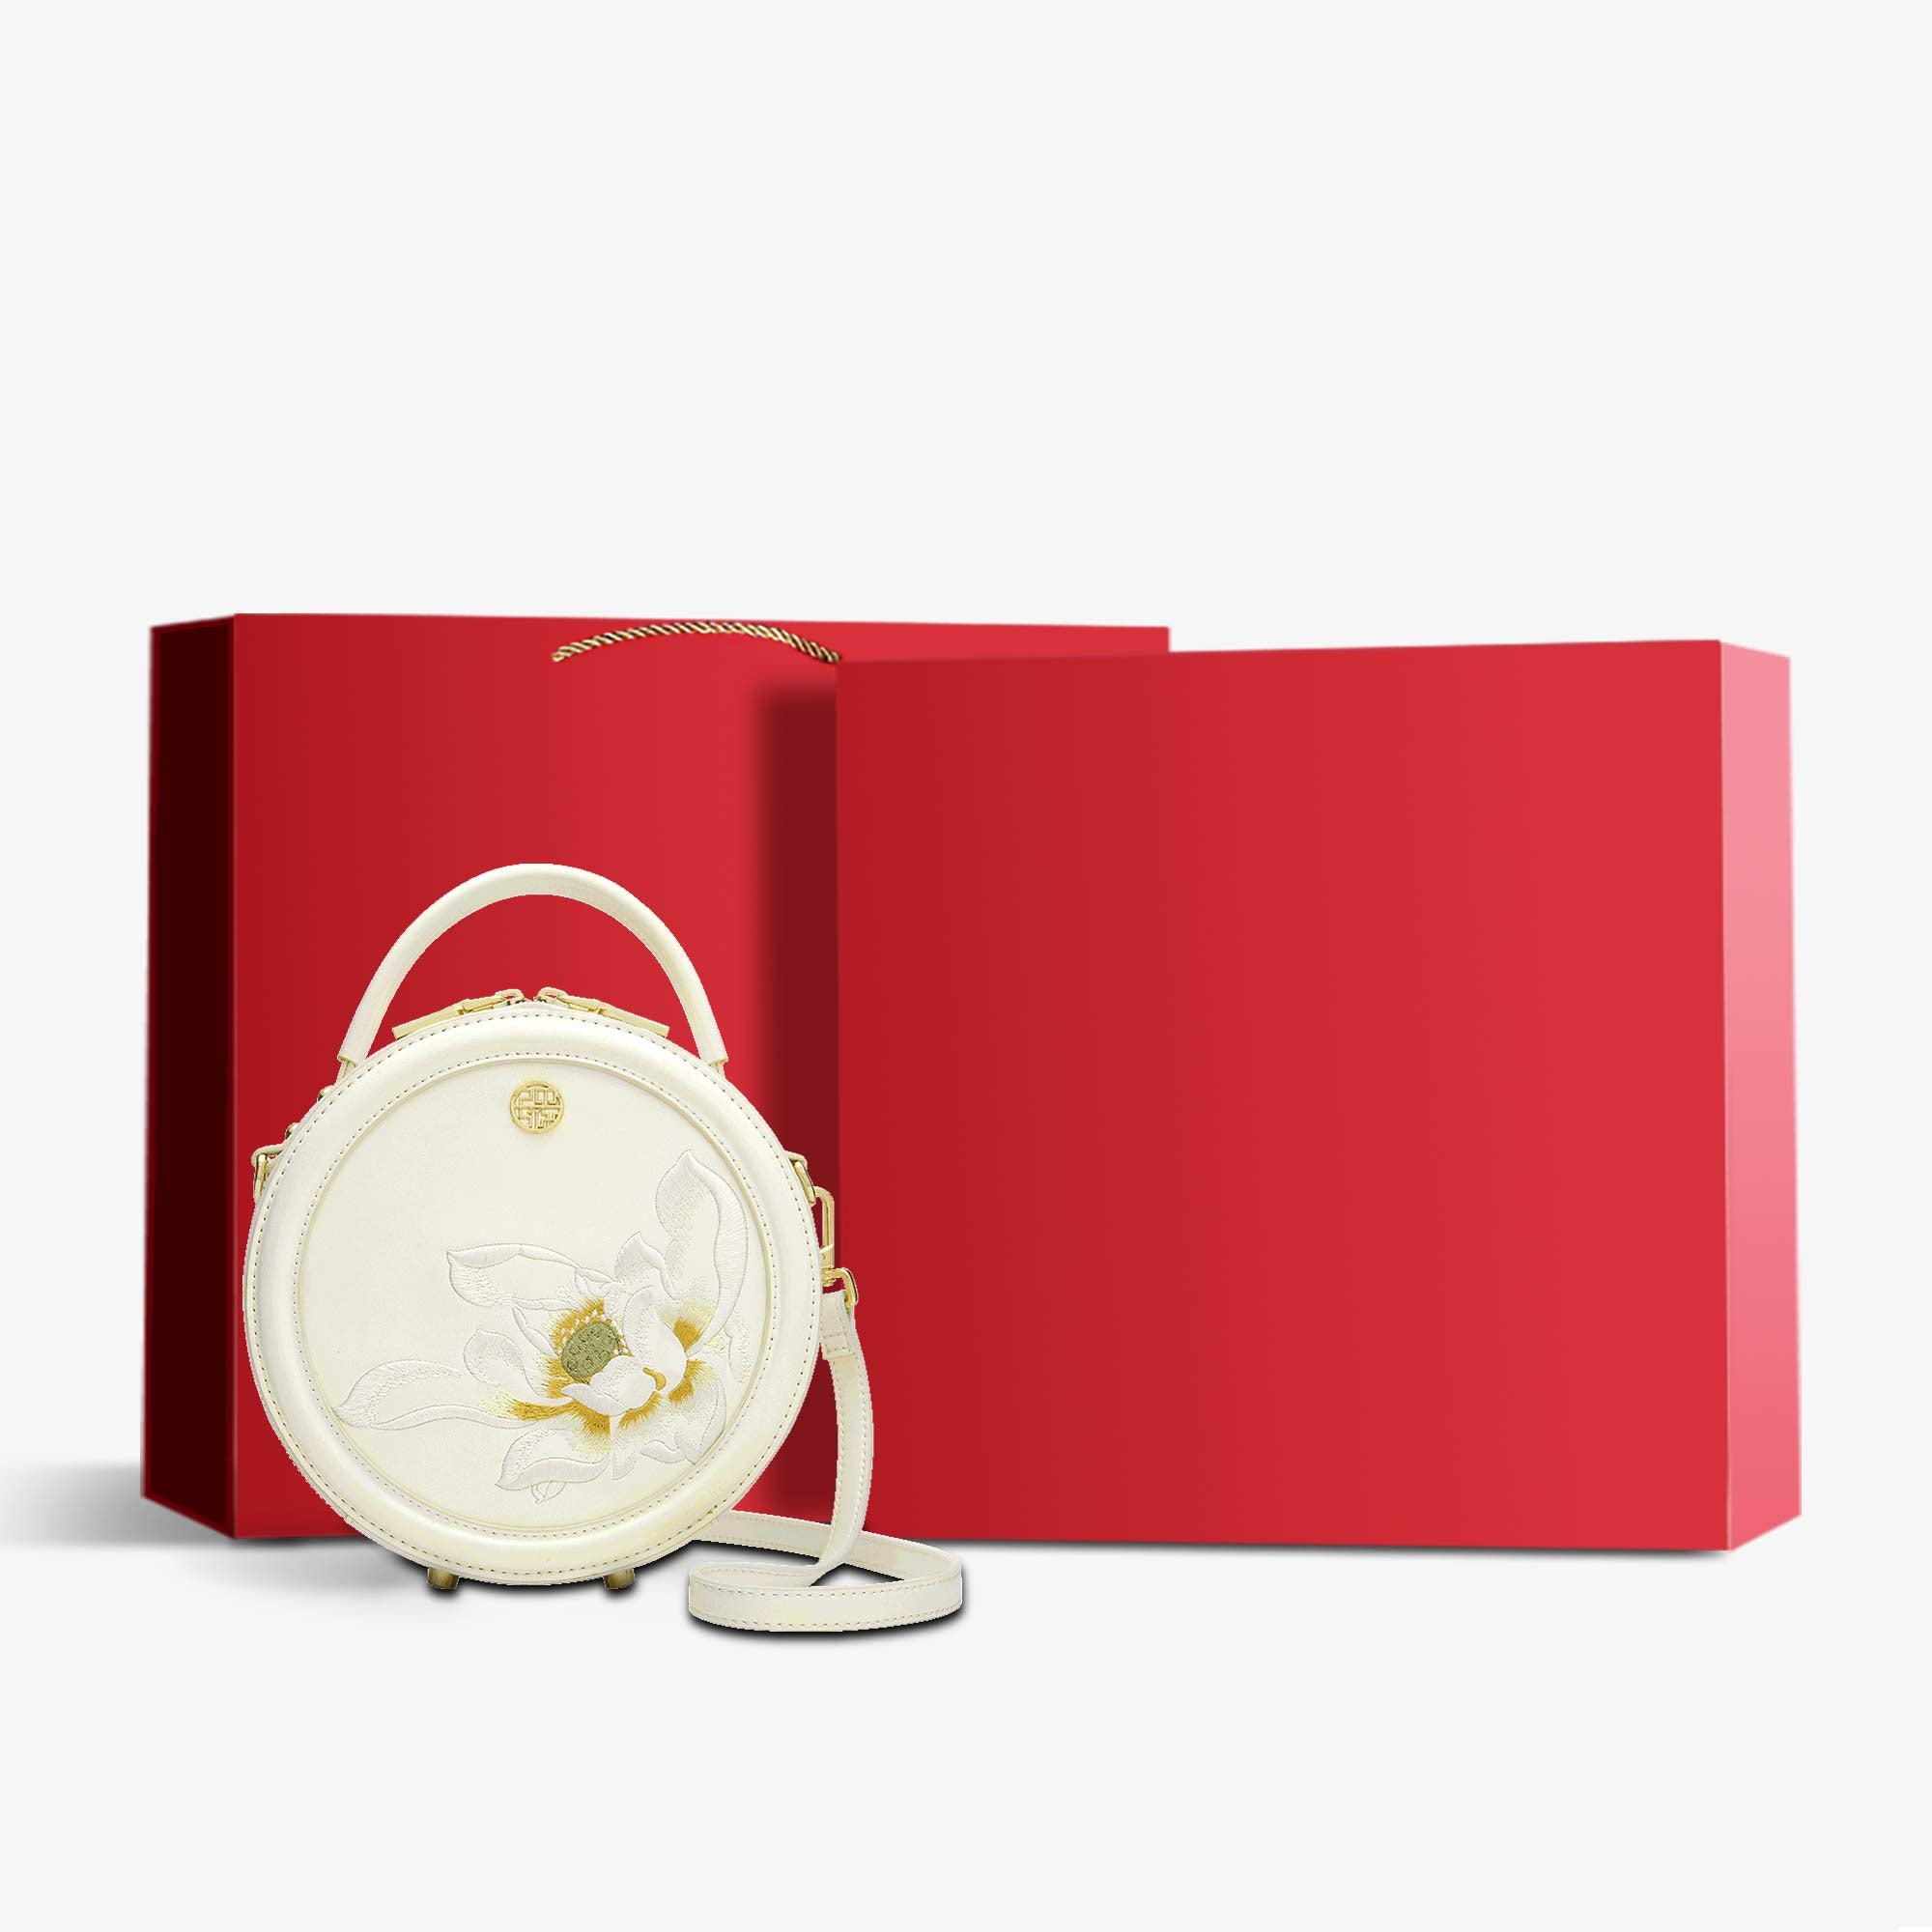 Embroidery Leather White Lotus Round Bag-Handbag-SinoCultural-White-Bag with Gift Box-P120355-g-SinoCultural